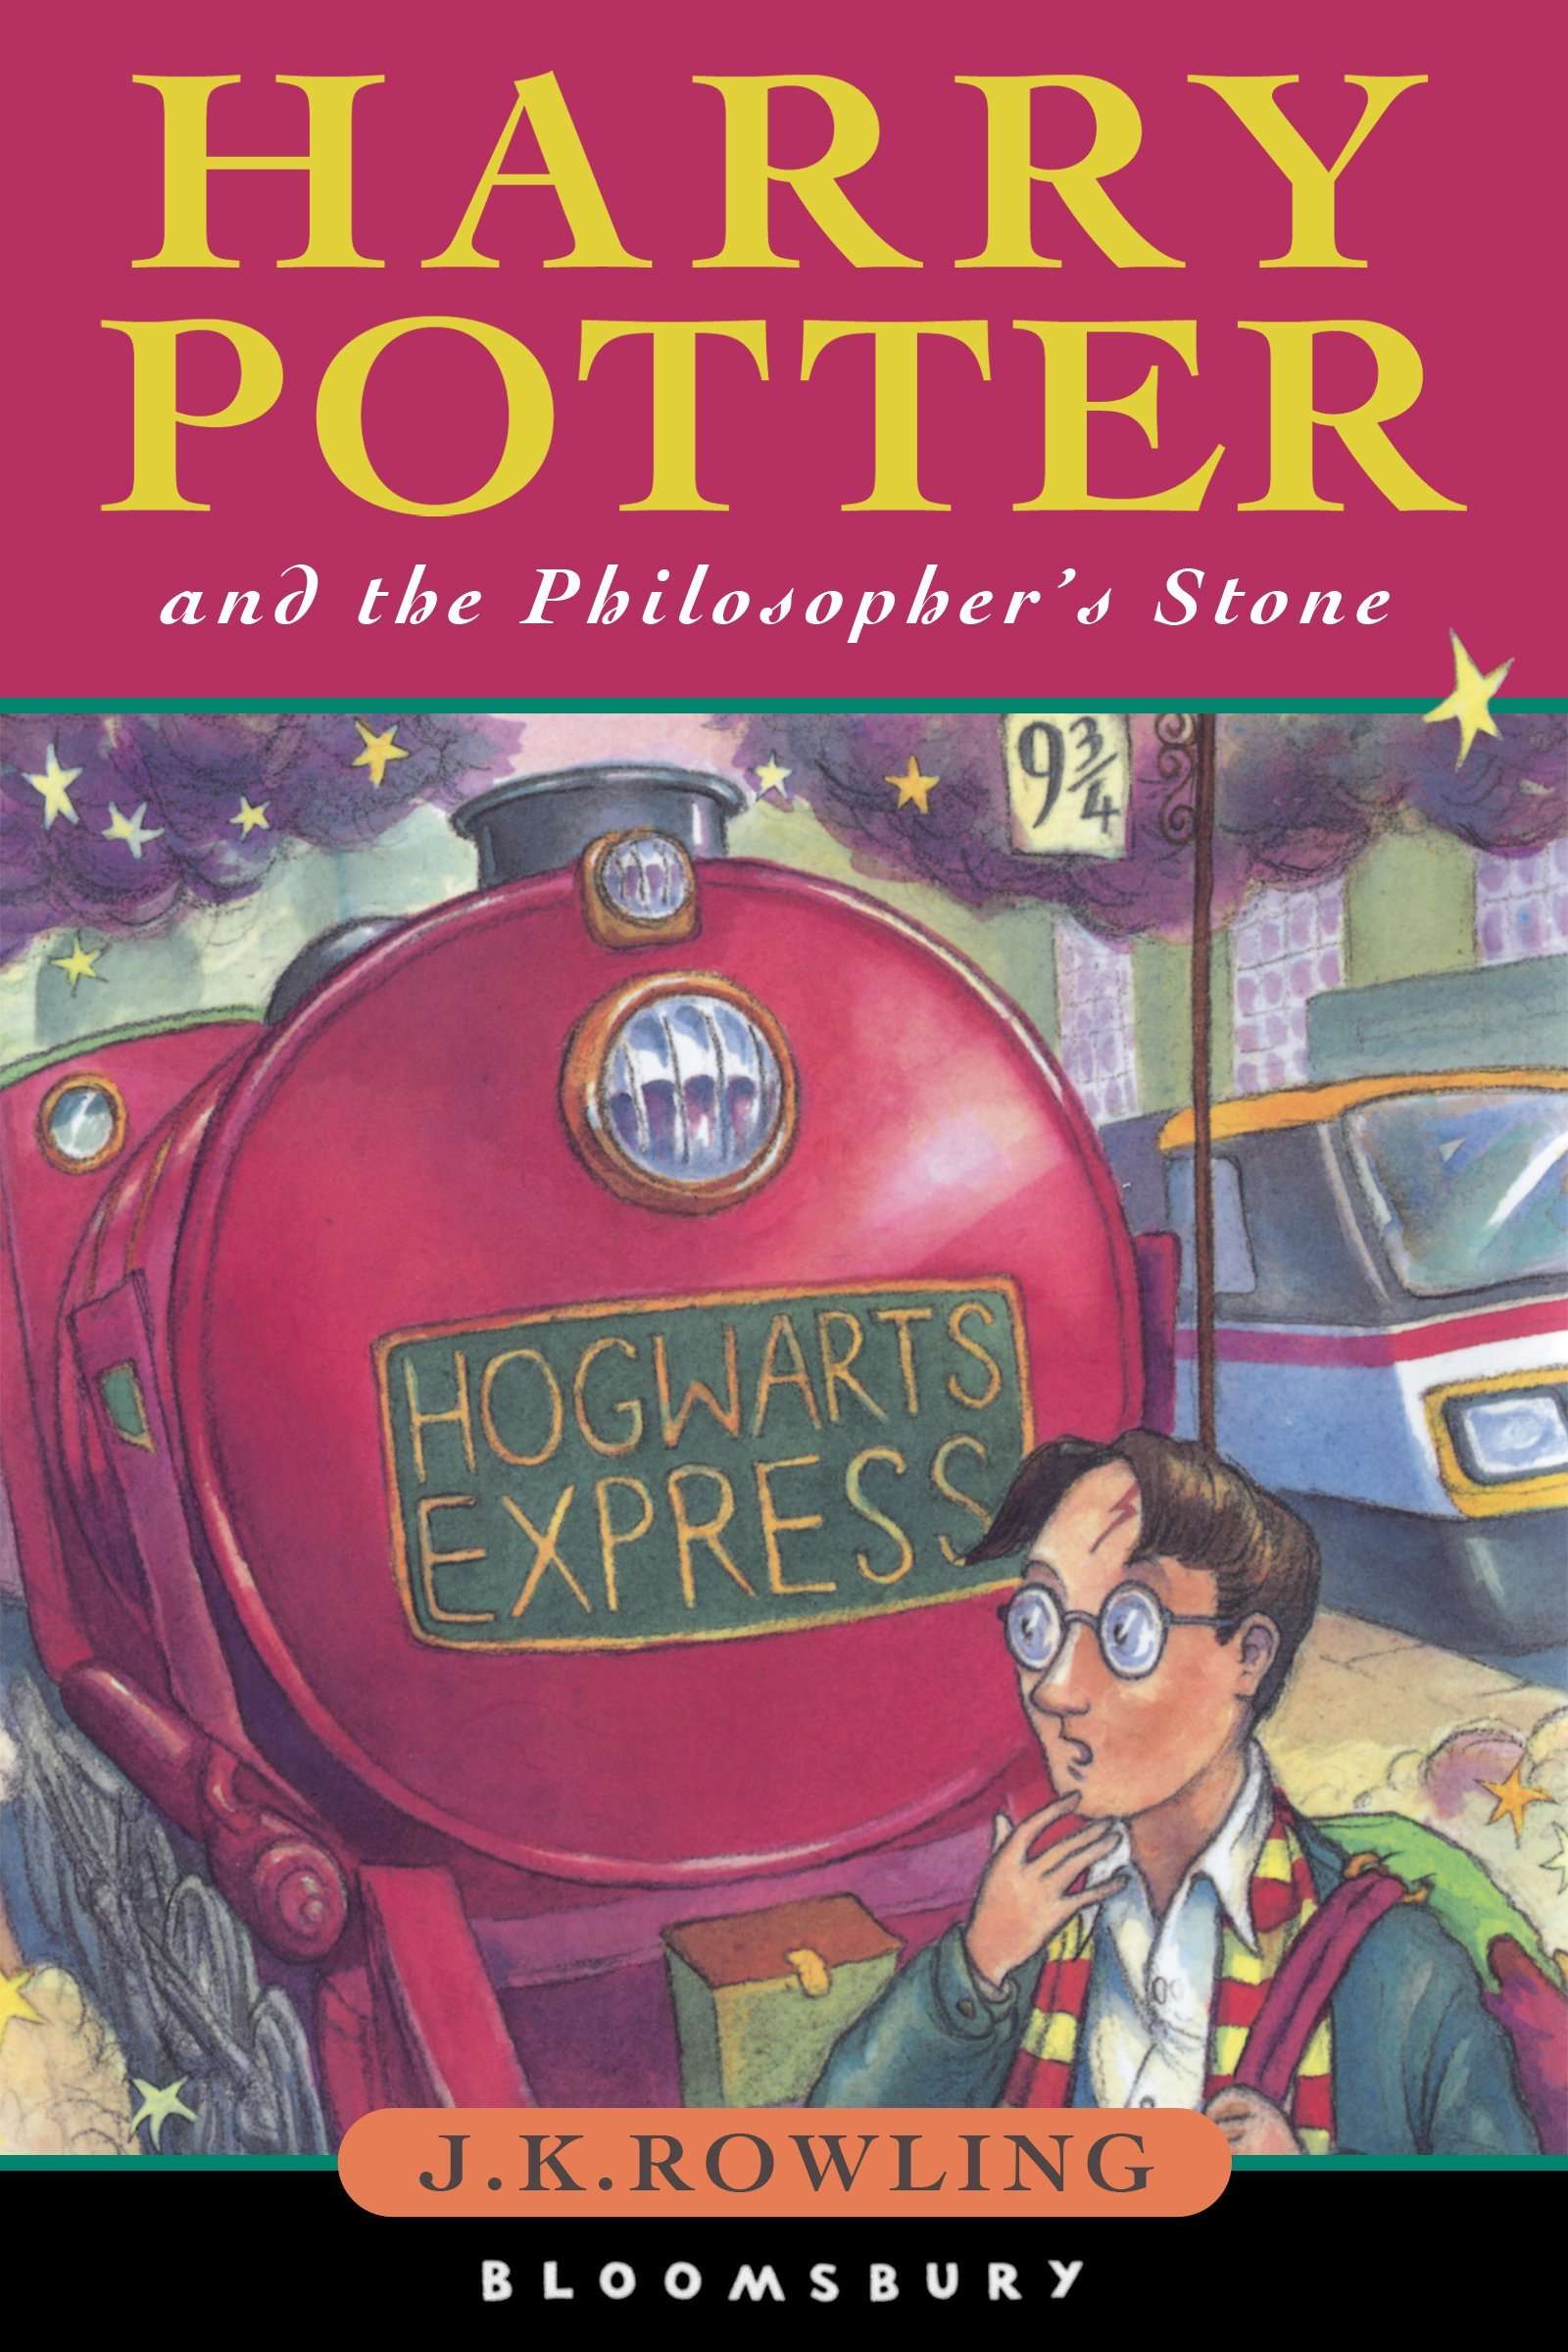 When Did The First Harry Potter Come Out